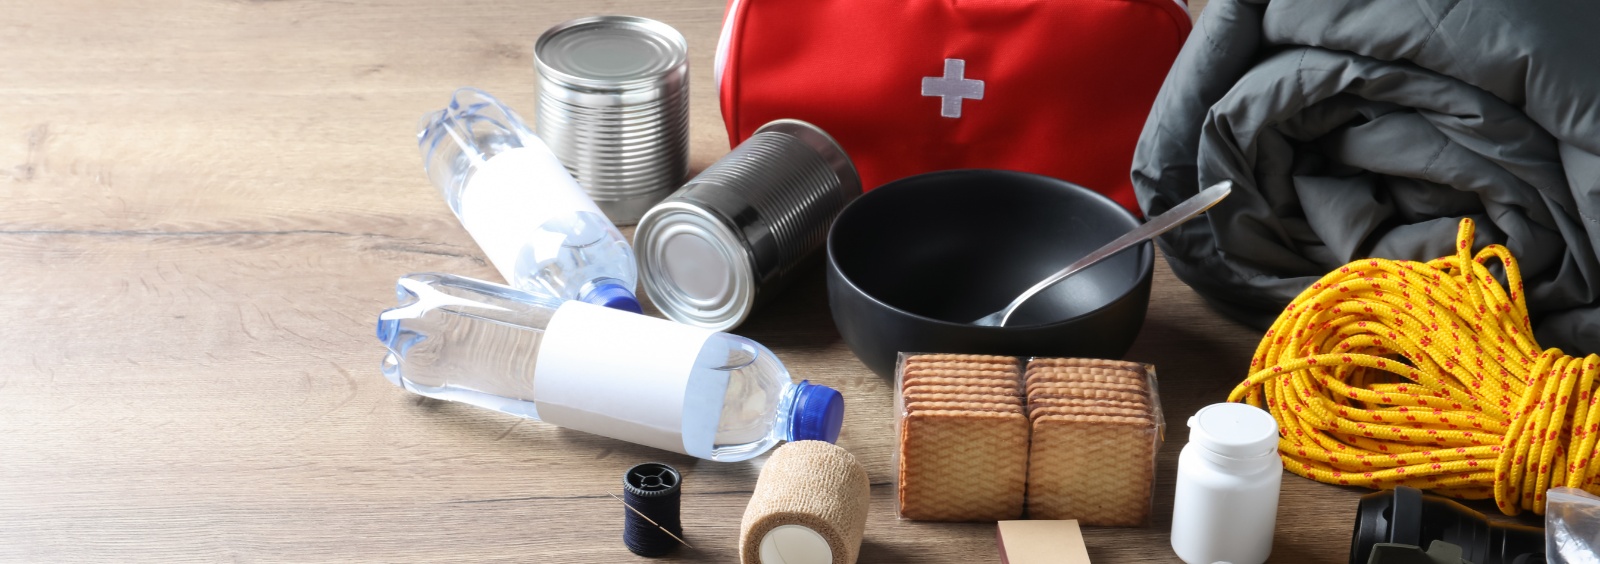 An emergency preparedness kit including water, a sleeping bag, flashlight, and first aid kit.